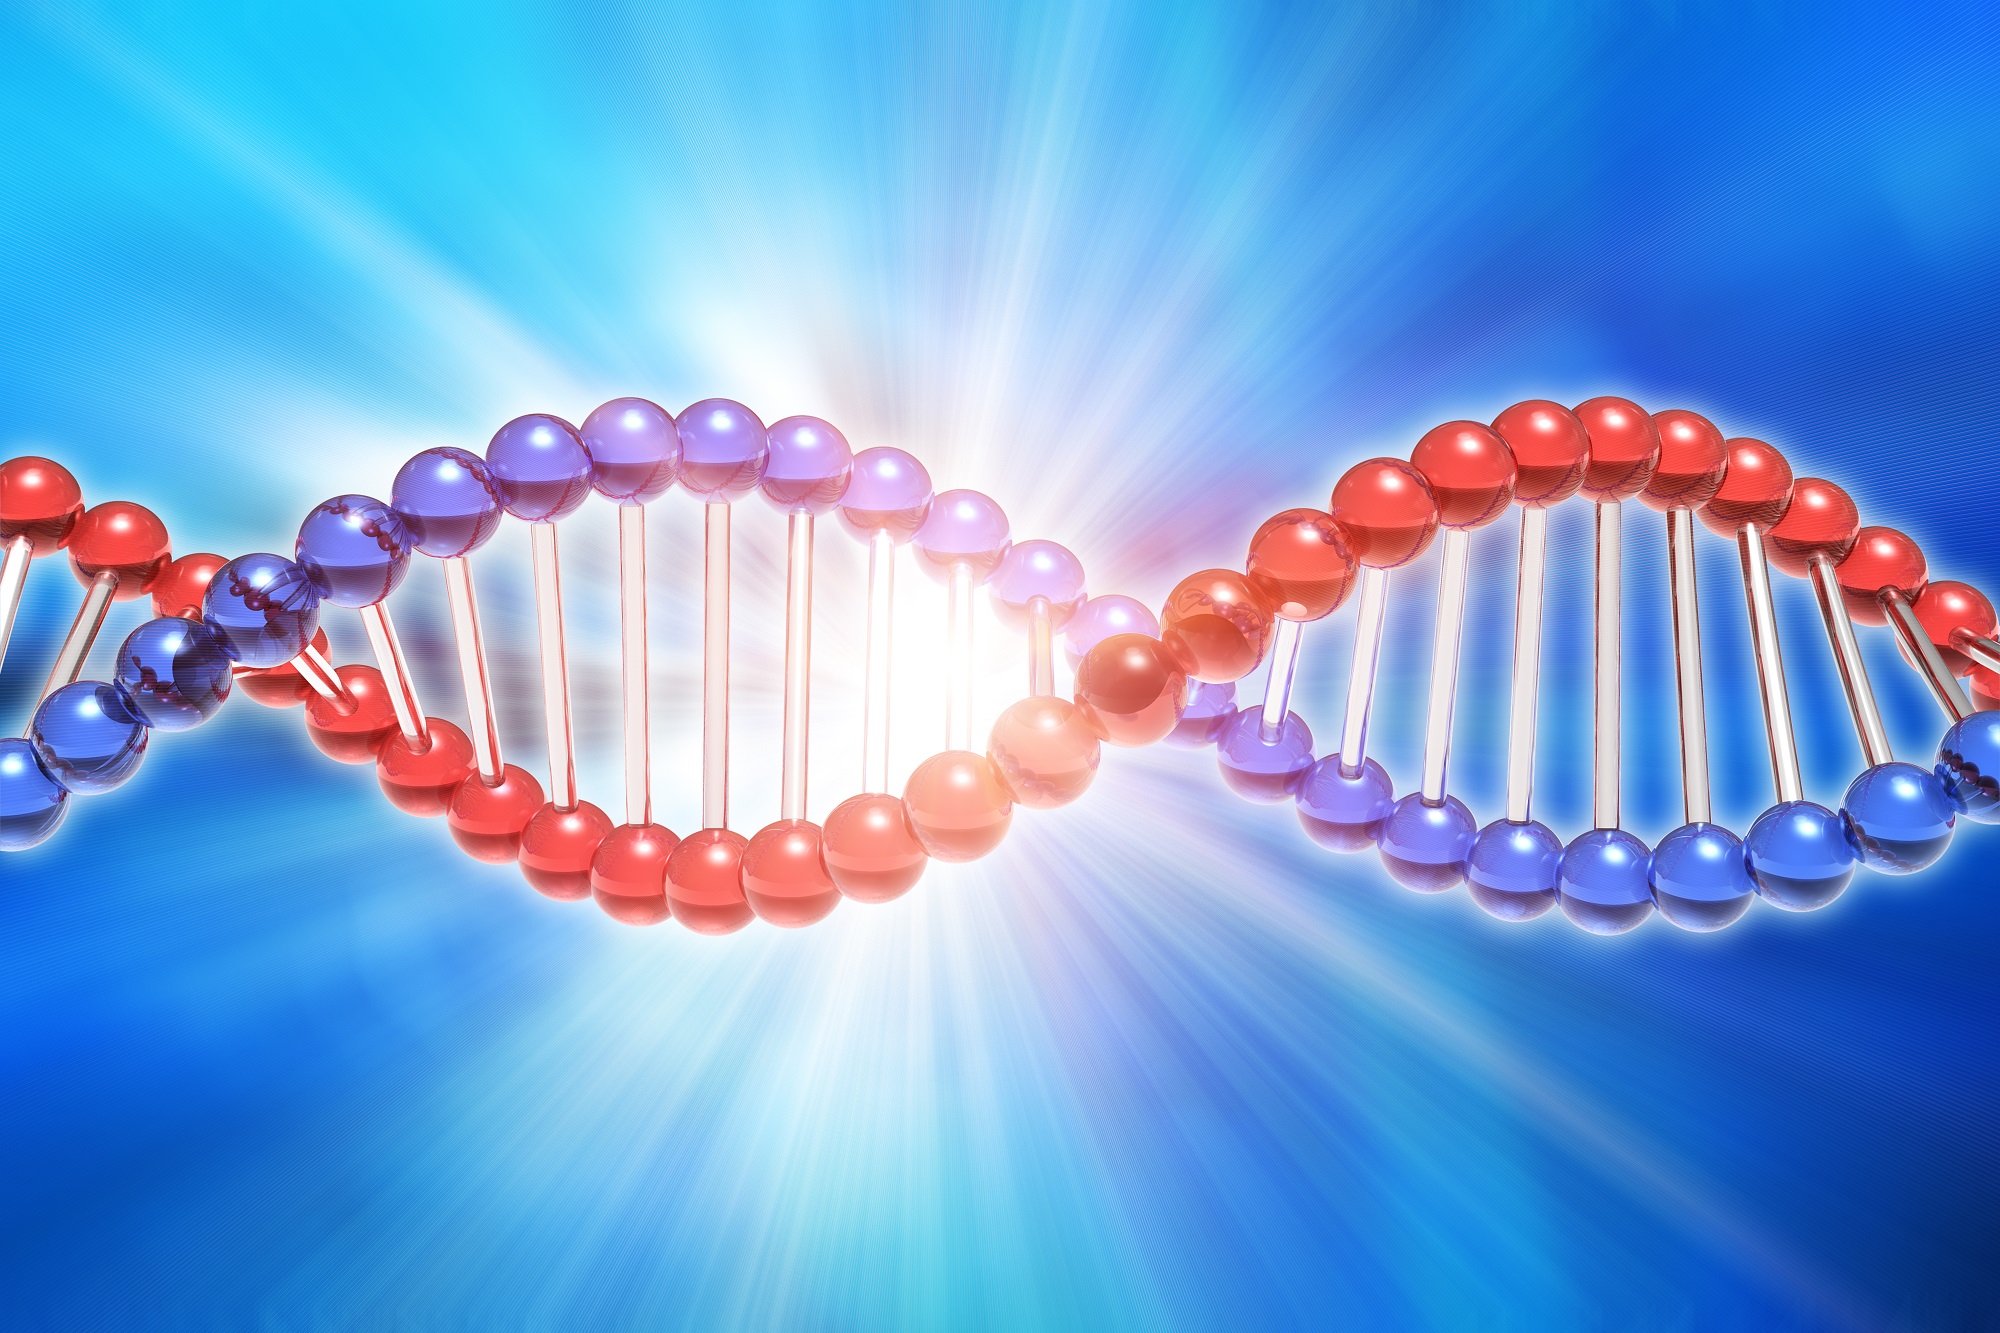 RootsTech Celebrates DNA Day with Free Webinars on April 25th